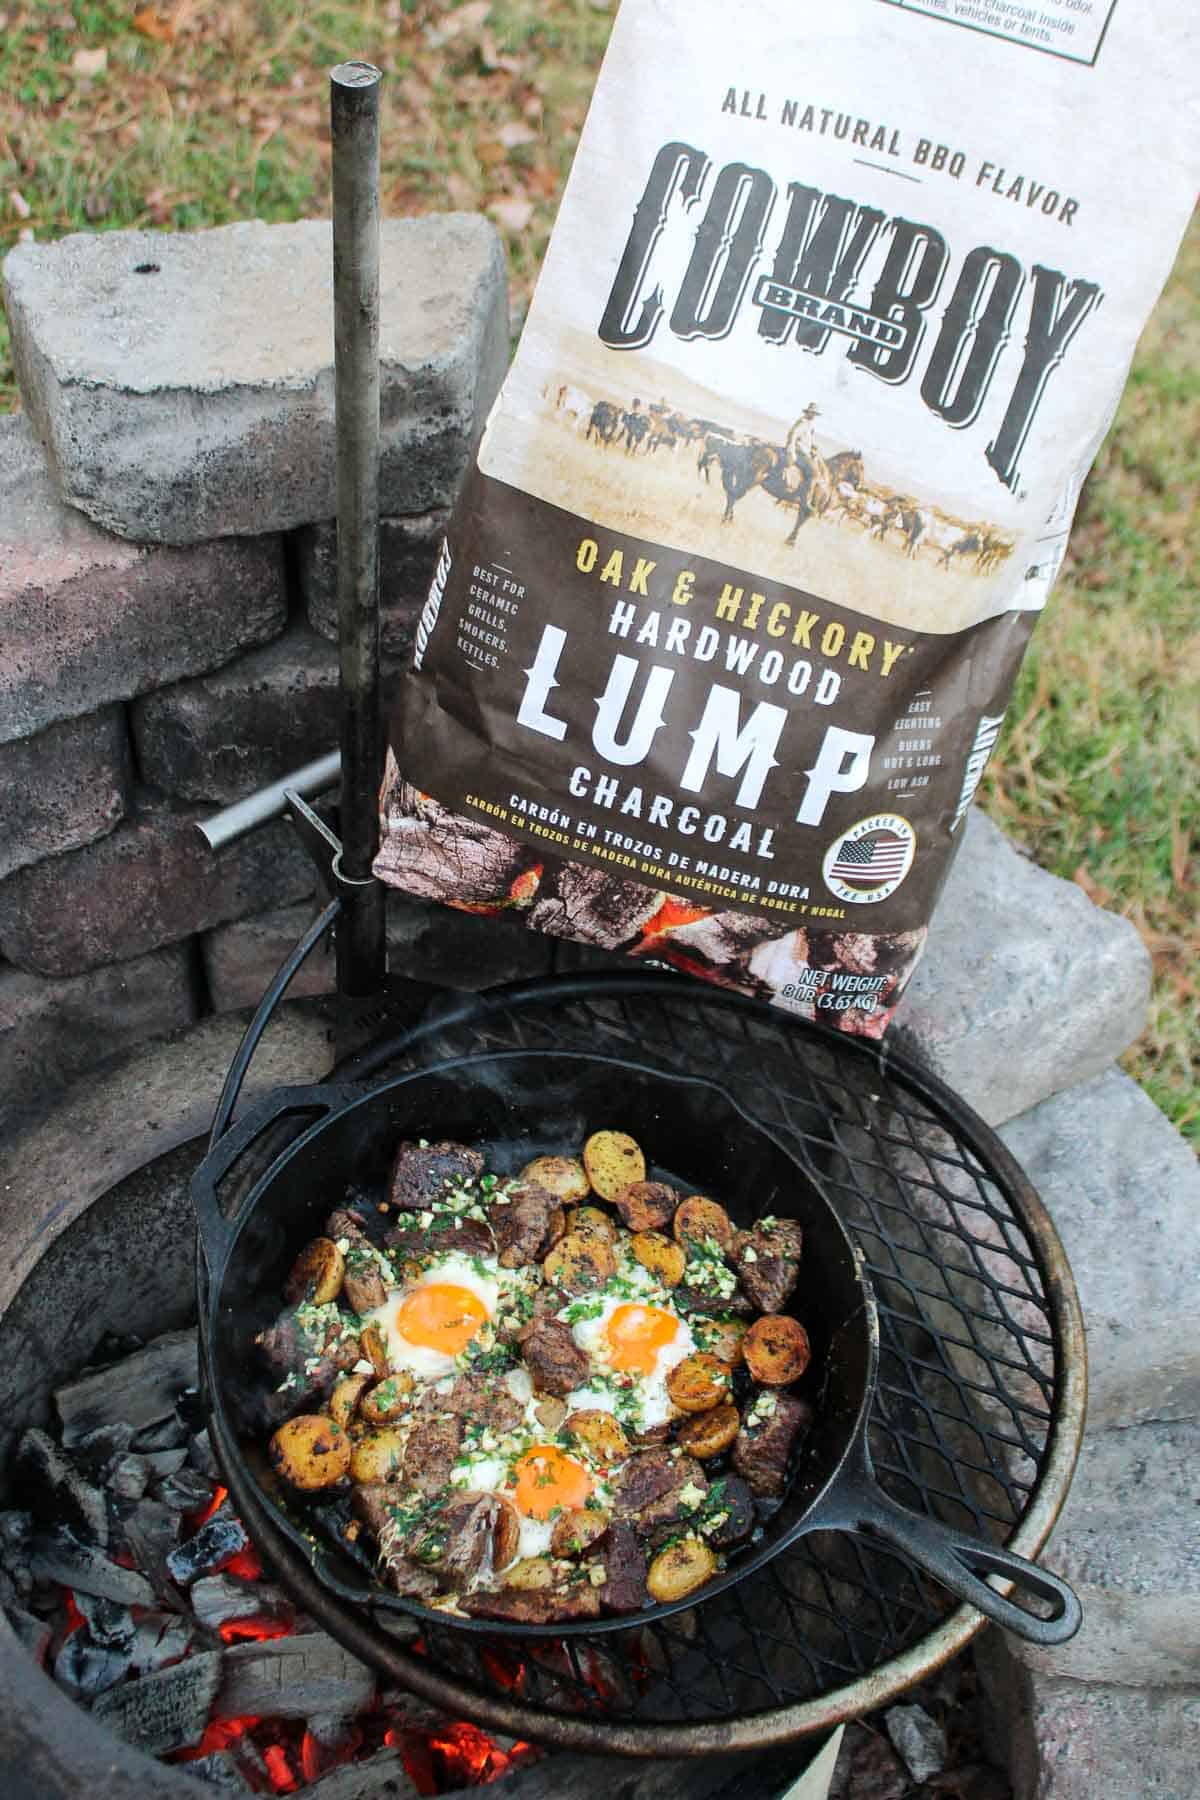 A bag of Cowboy Charcoal sits next to the fire pit with the finished steak, eggs, and potatoes. 